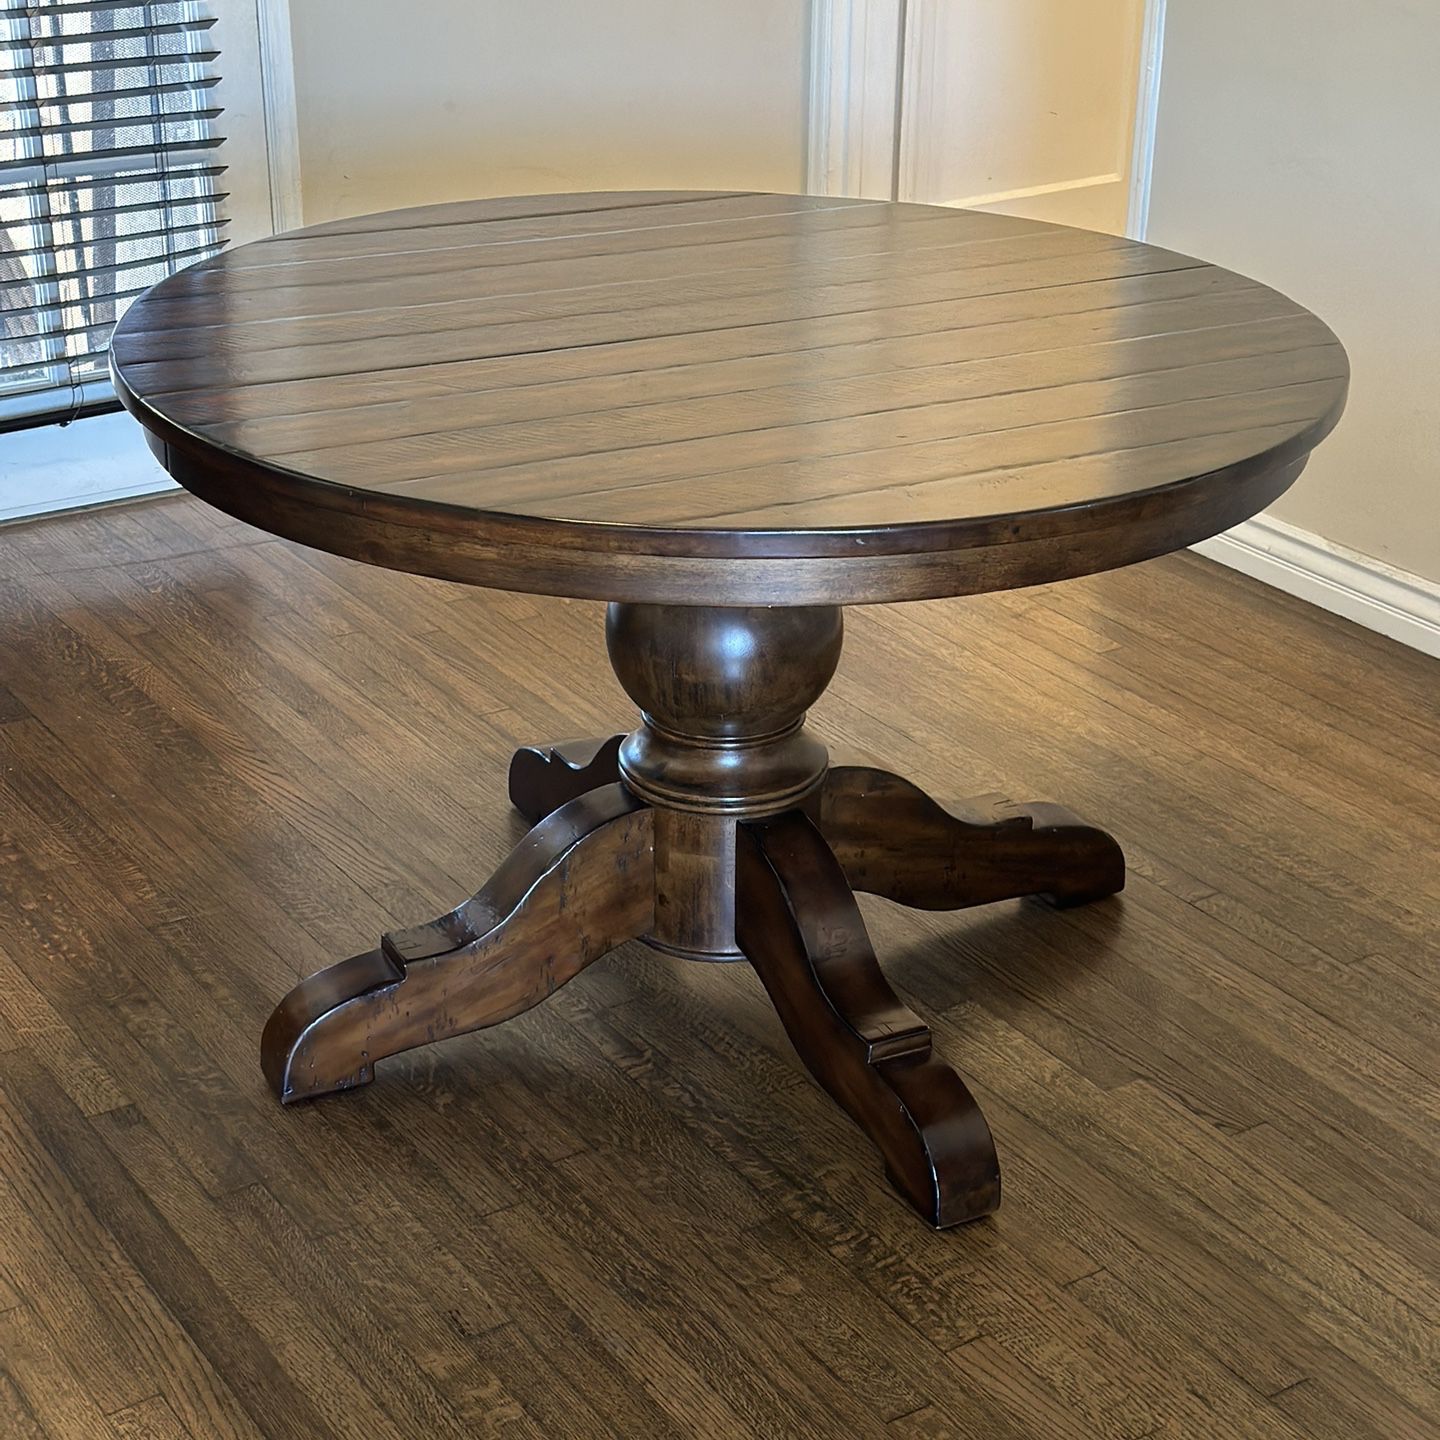 Pottery Barn Round Extending Dining Table With Chairs